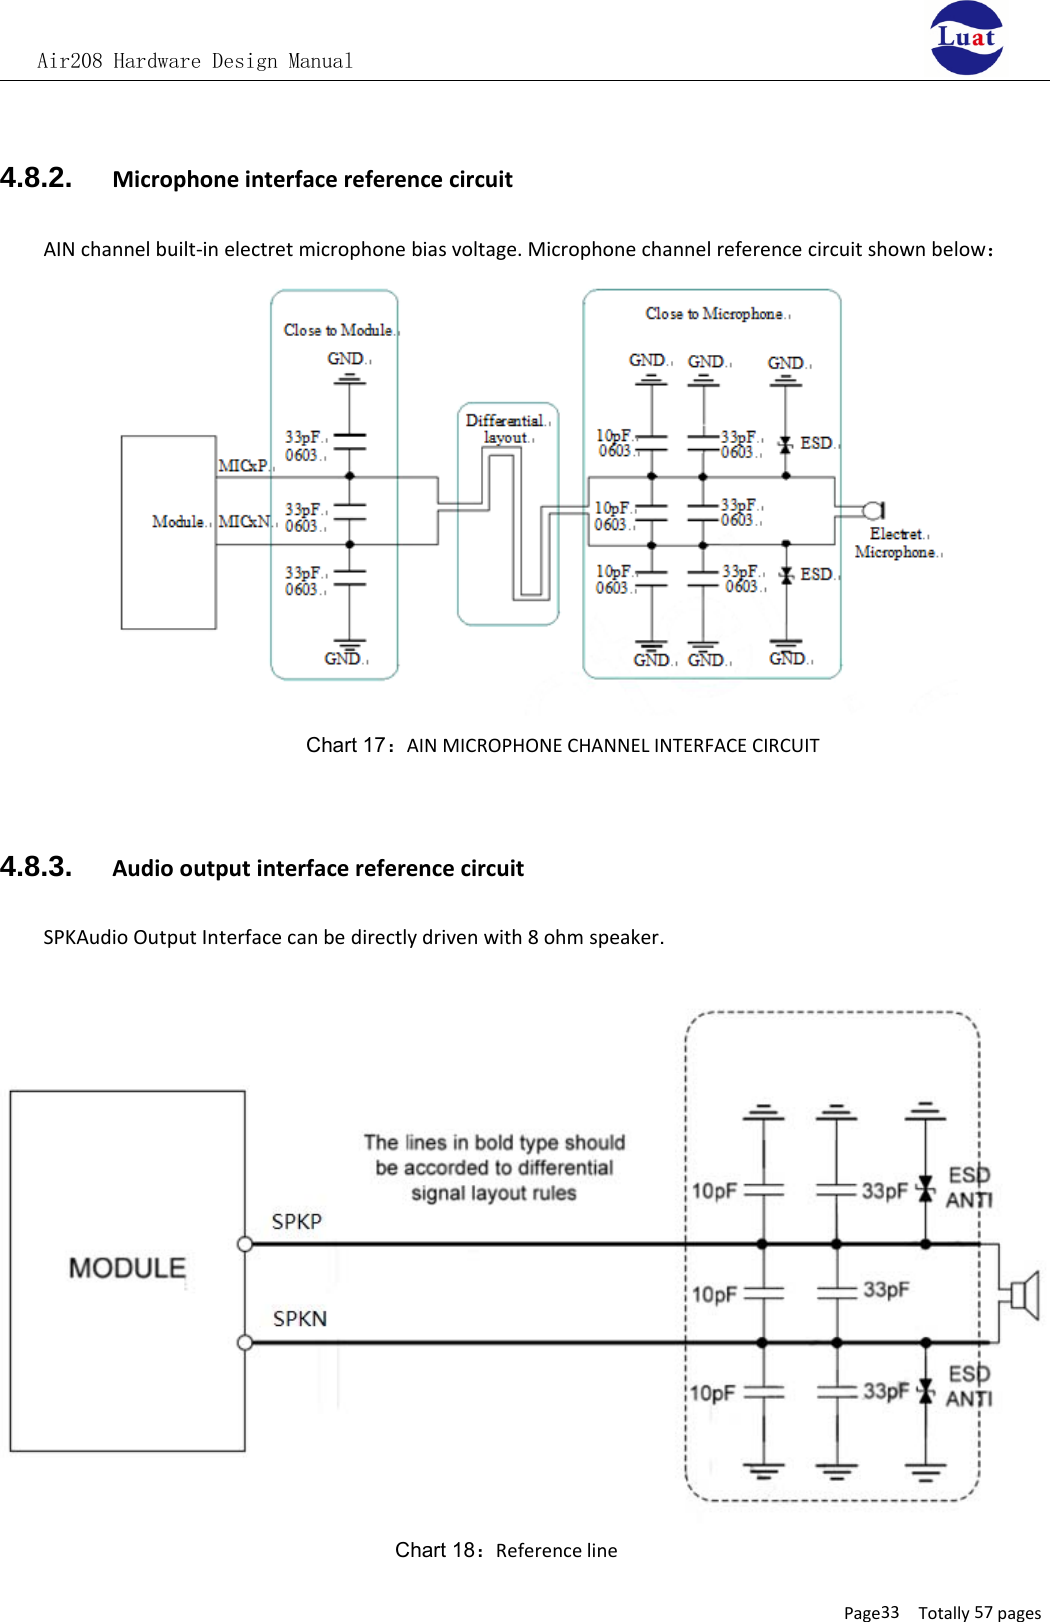 Air208 Hardware Design ManualPage33 Totally 57 pages4.8.2. Microphone interface reference circuitAIN channel built‐in electret microphone bias voltage. Microphone channel reference circuit shown below：Chart 17：AIN MICROPHONE CHANNEL INTERFACE CIRCUIT4.8.3. Audio output interface reference circuitSPKAudio Output Interface can be directly driven with 8 ohm speaker.Chart 18：Reference line